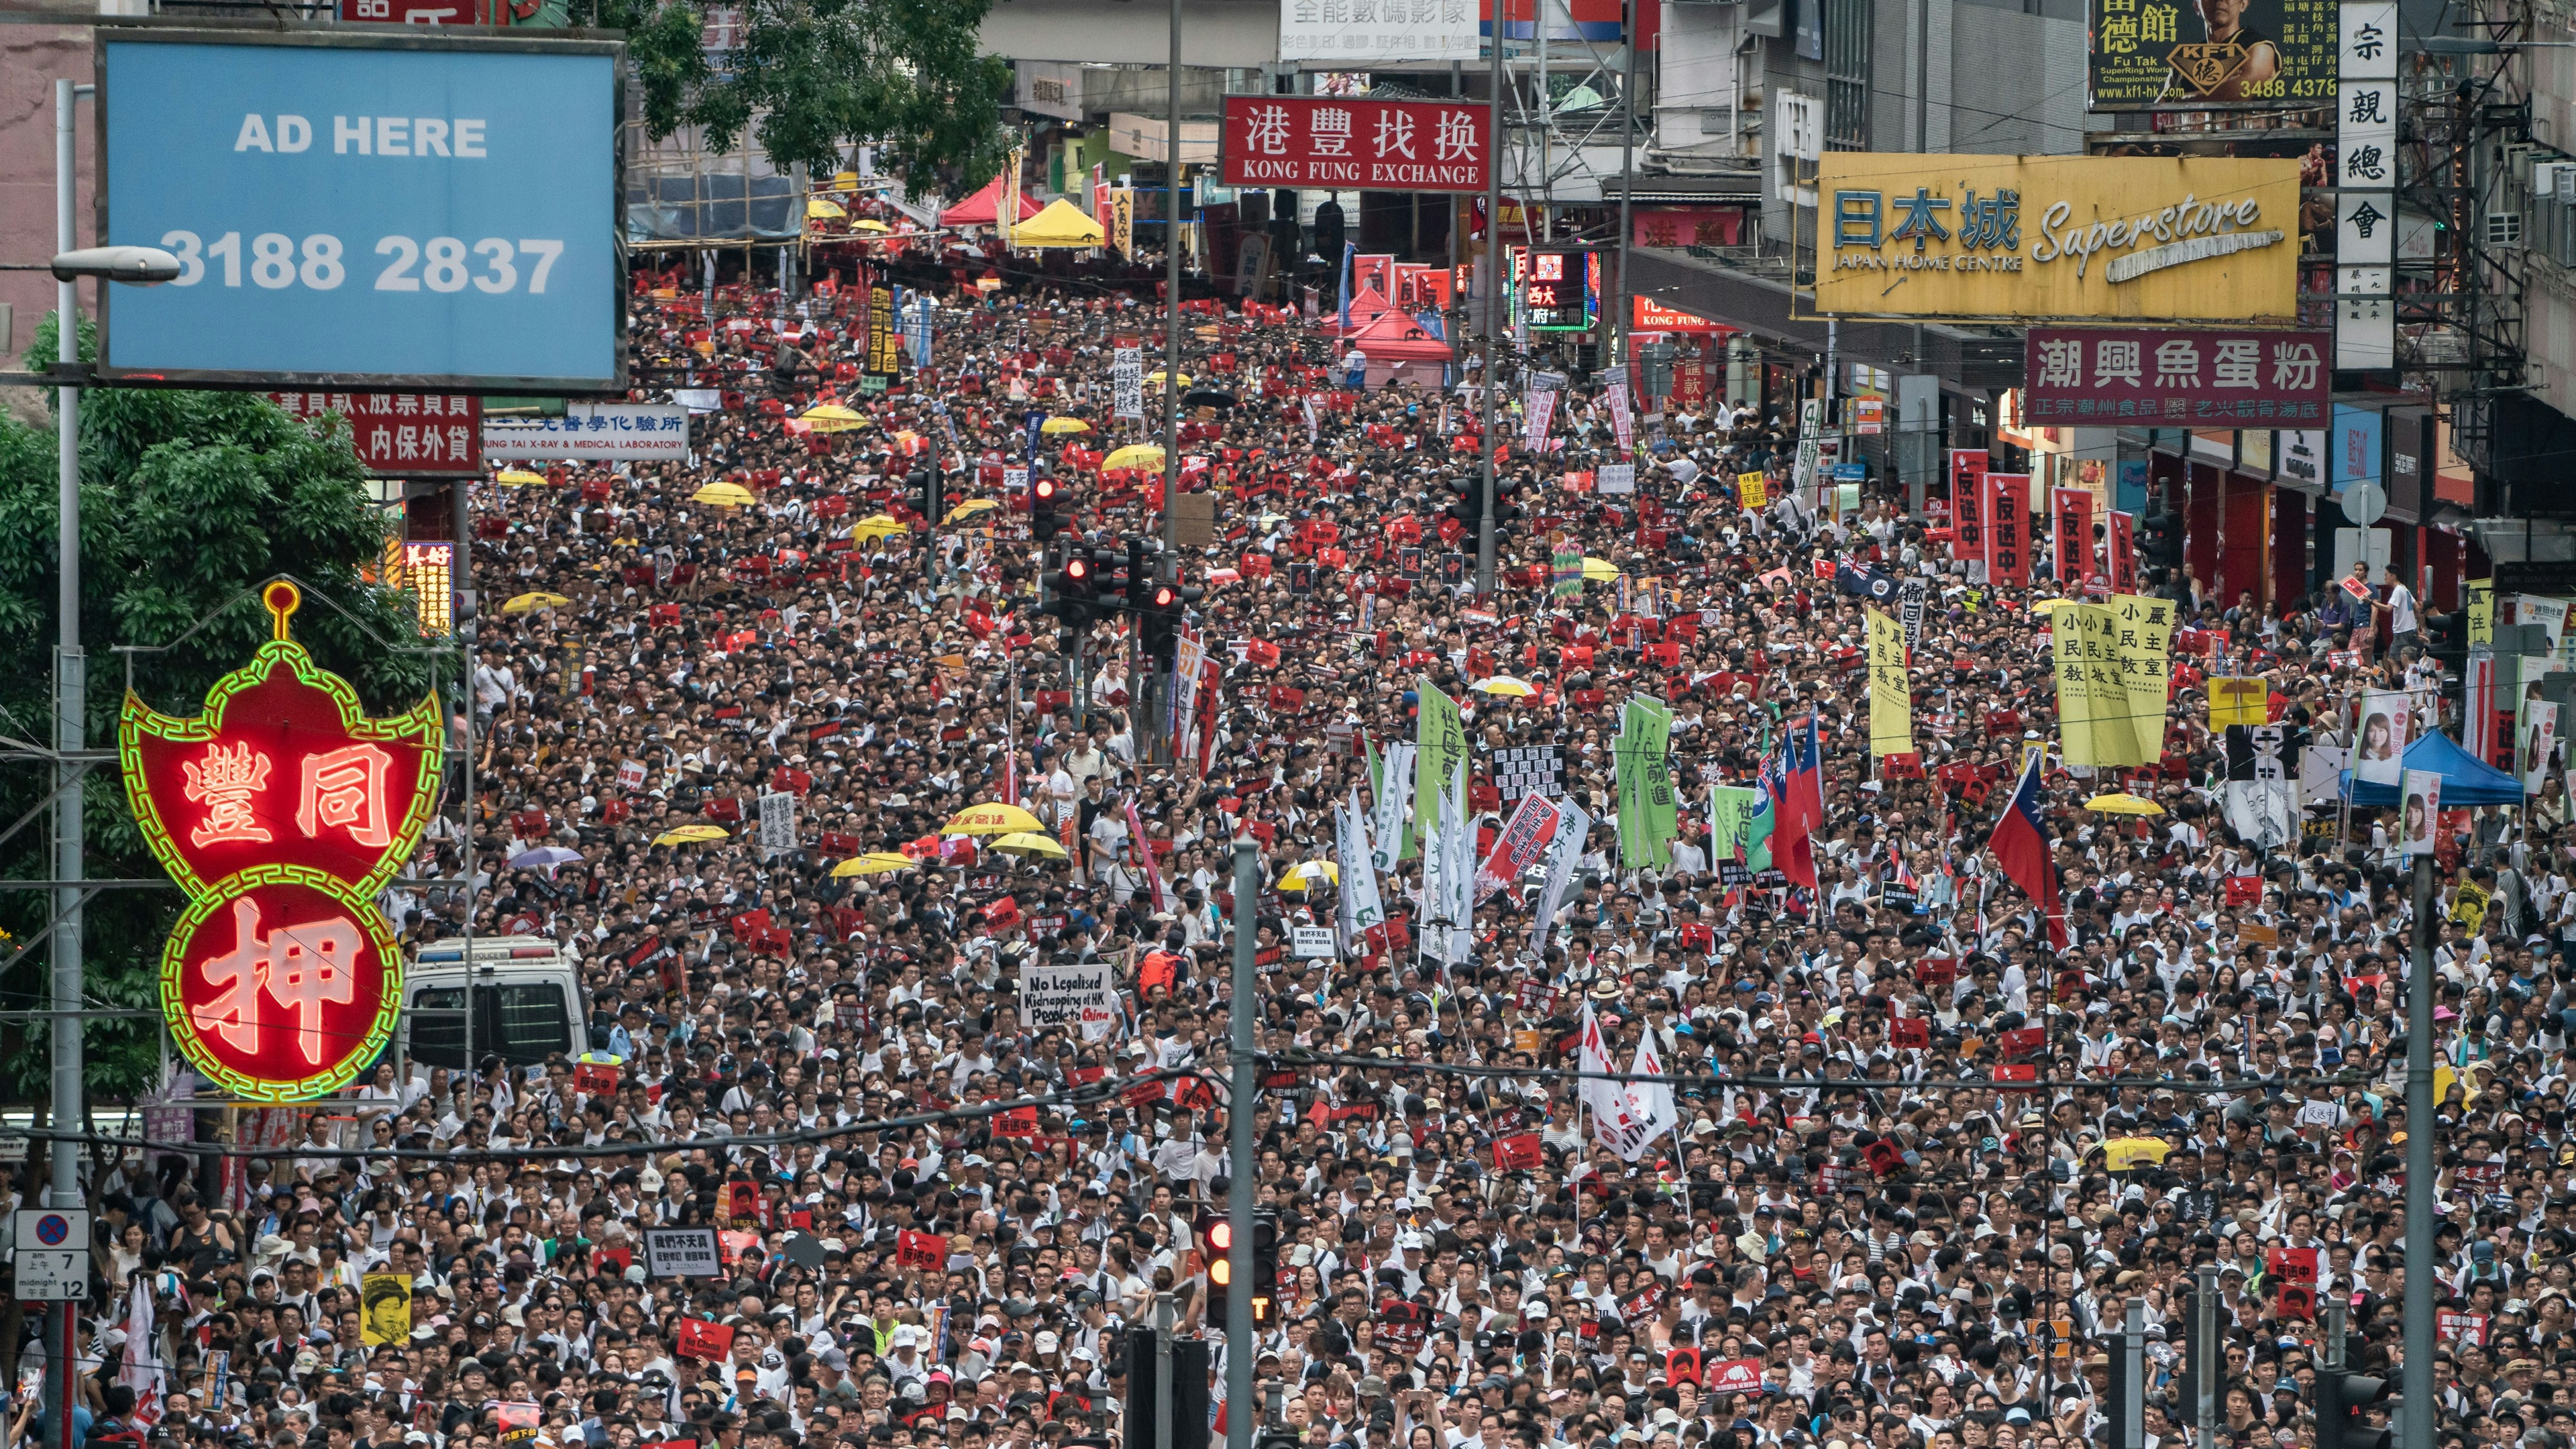 Hong Kong protests over extradition law